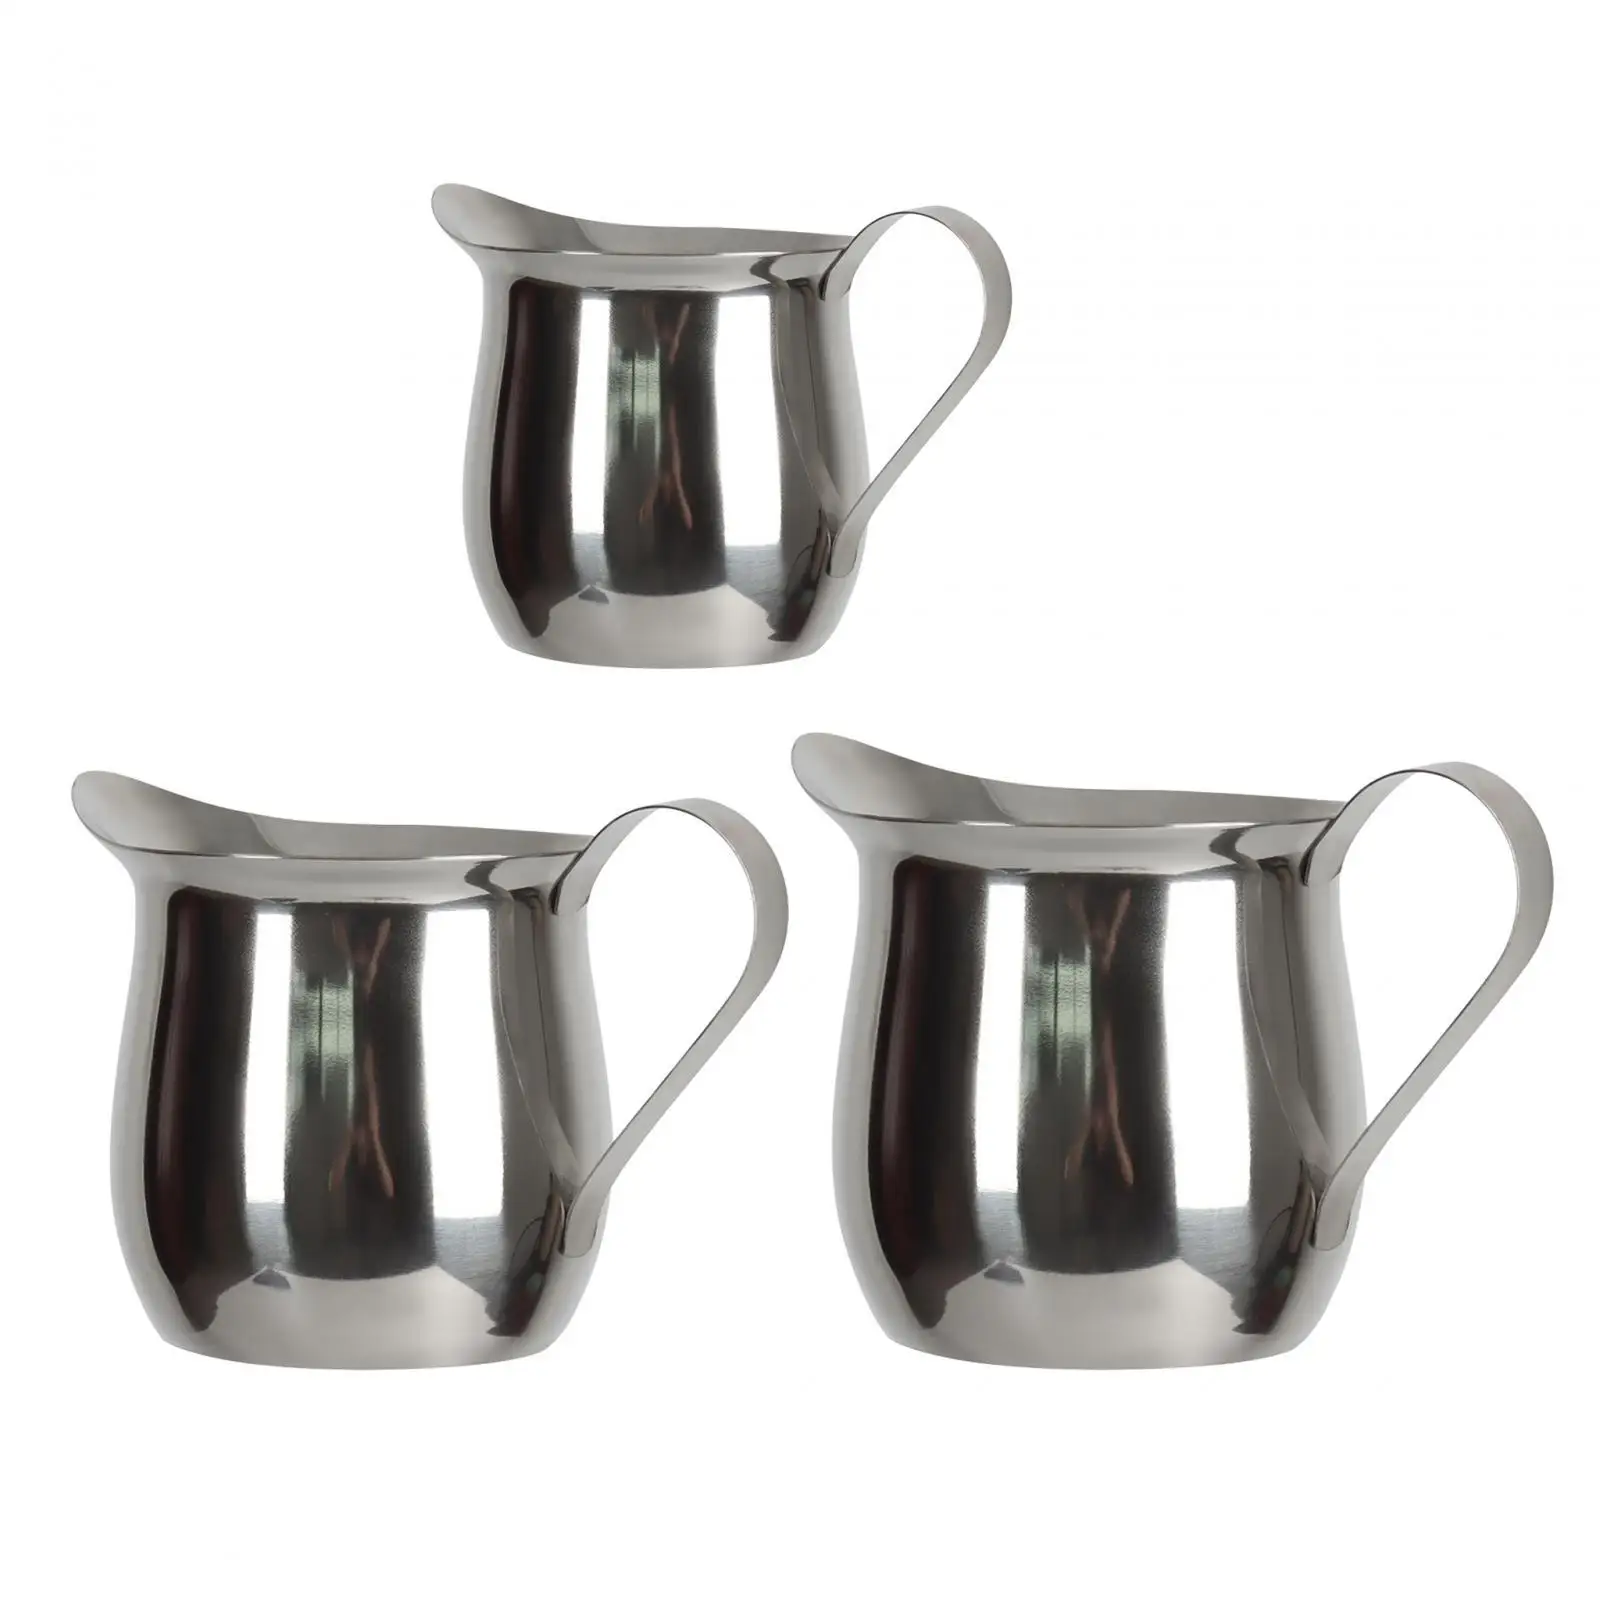 Milk Frothing Pitcher Stainless Steel Coffee Milk Frothing Jug Espresso Steaming Pitcher for Home Shop Kitchen Cappuccino Cafe